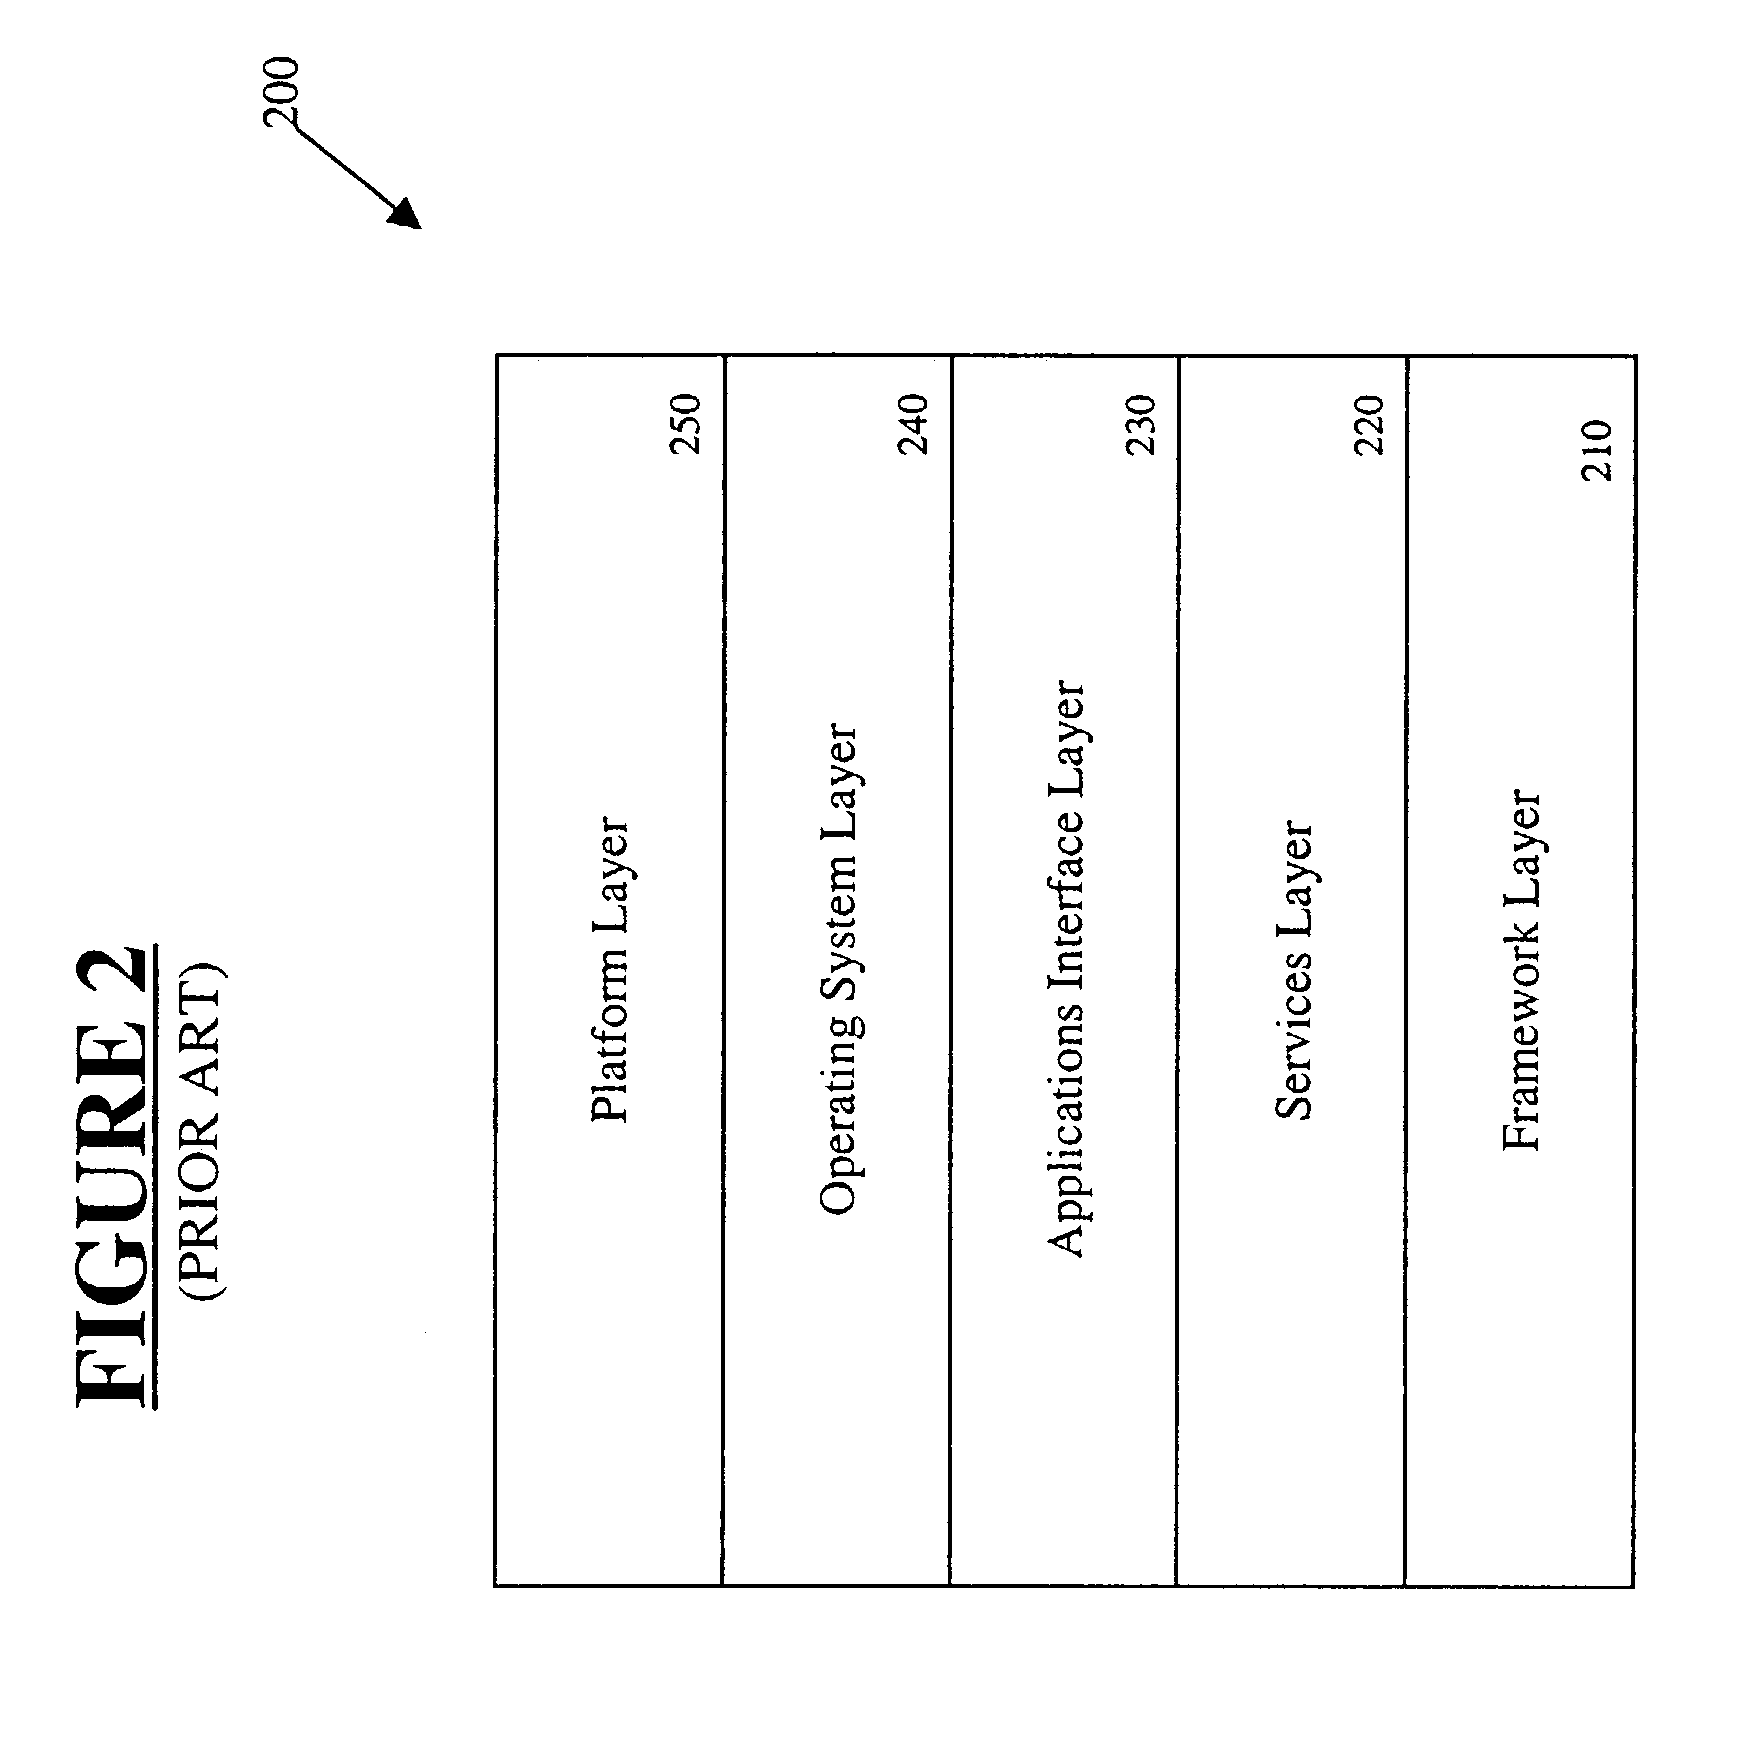 System and method for managing software version upgrades in a networked computer system